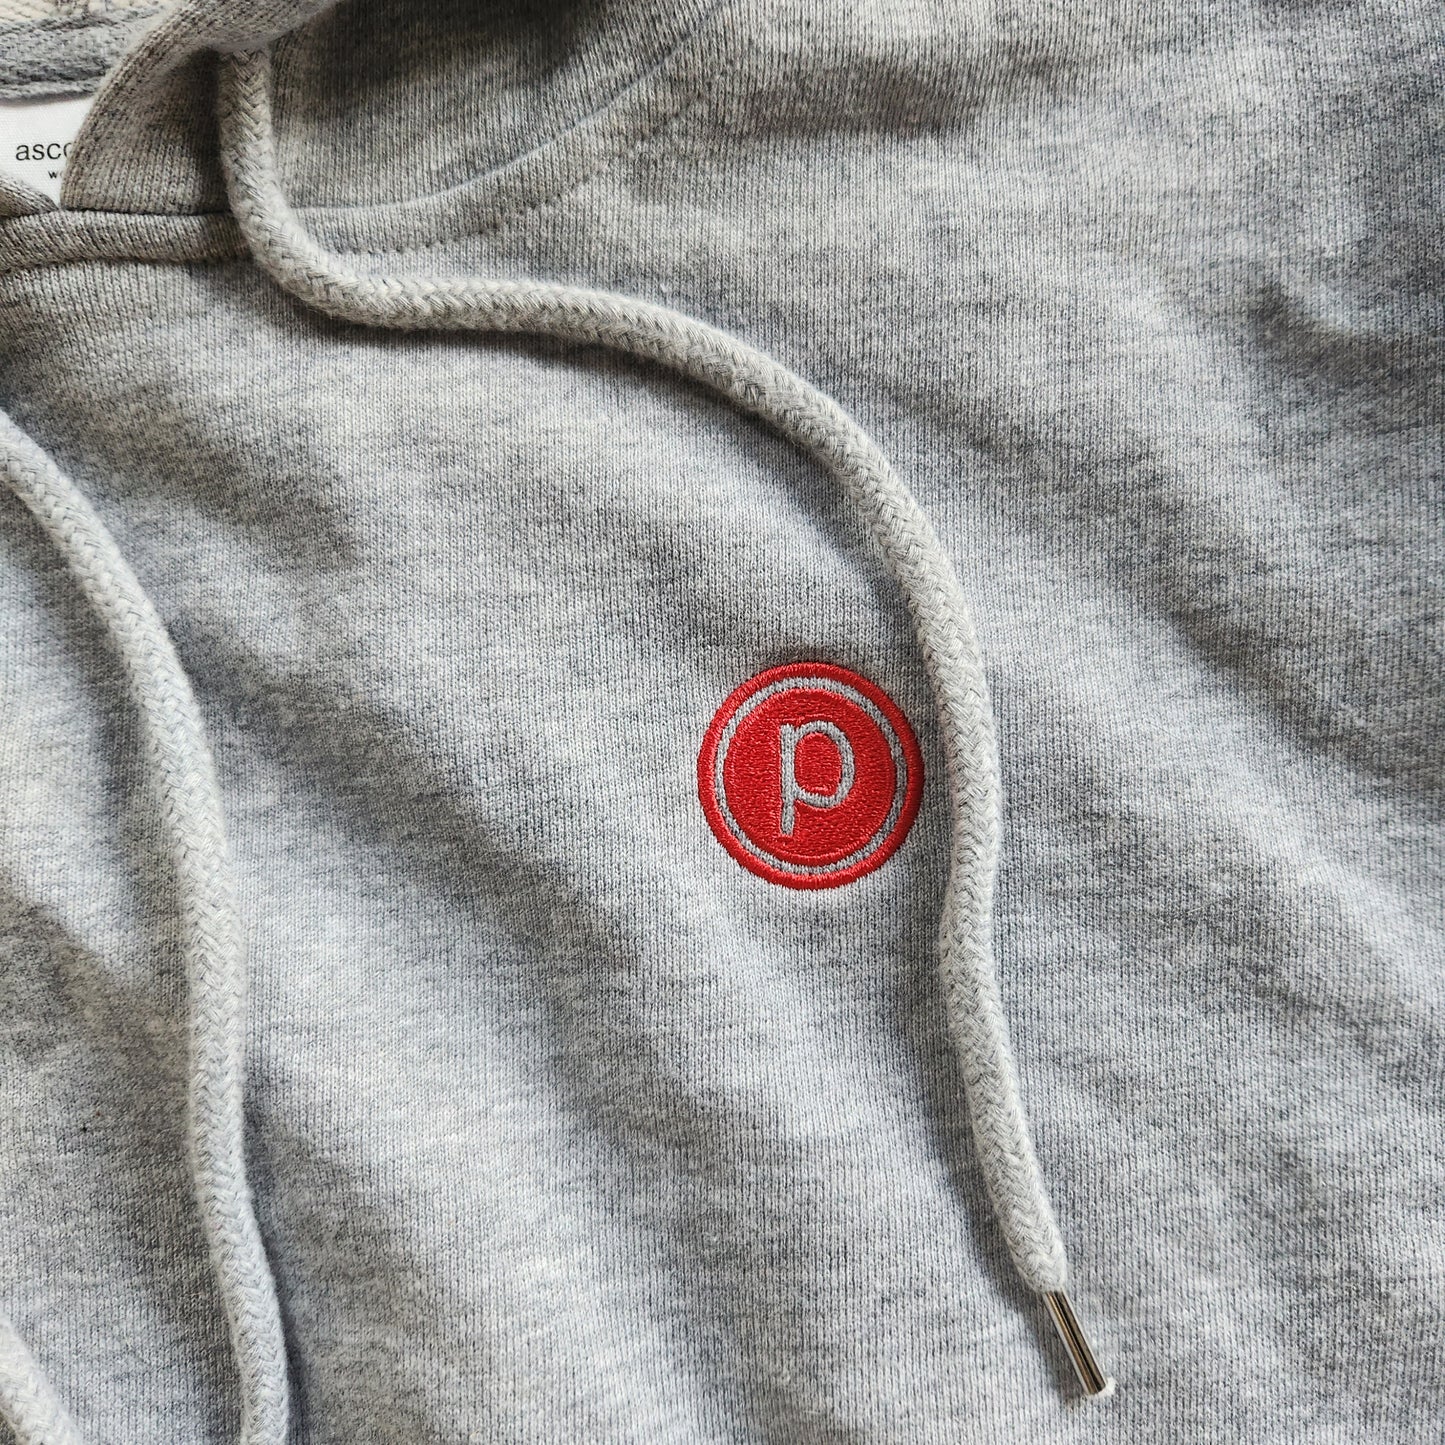 Only one! Pure Barre Embroidered Cropped Gray Hoodie